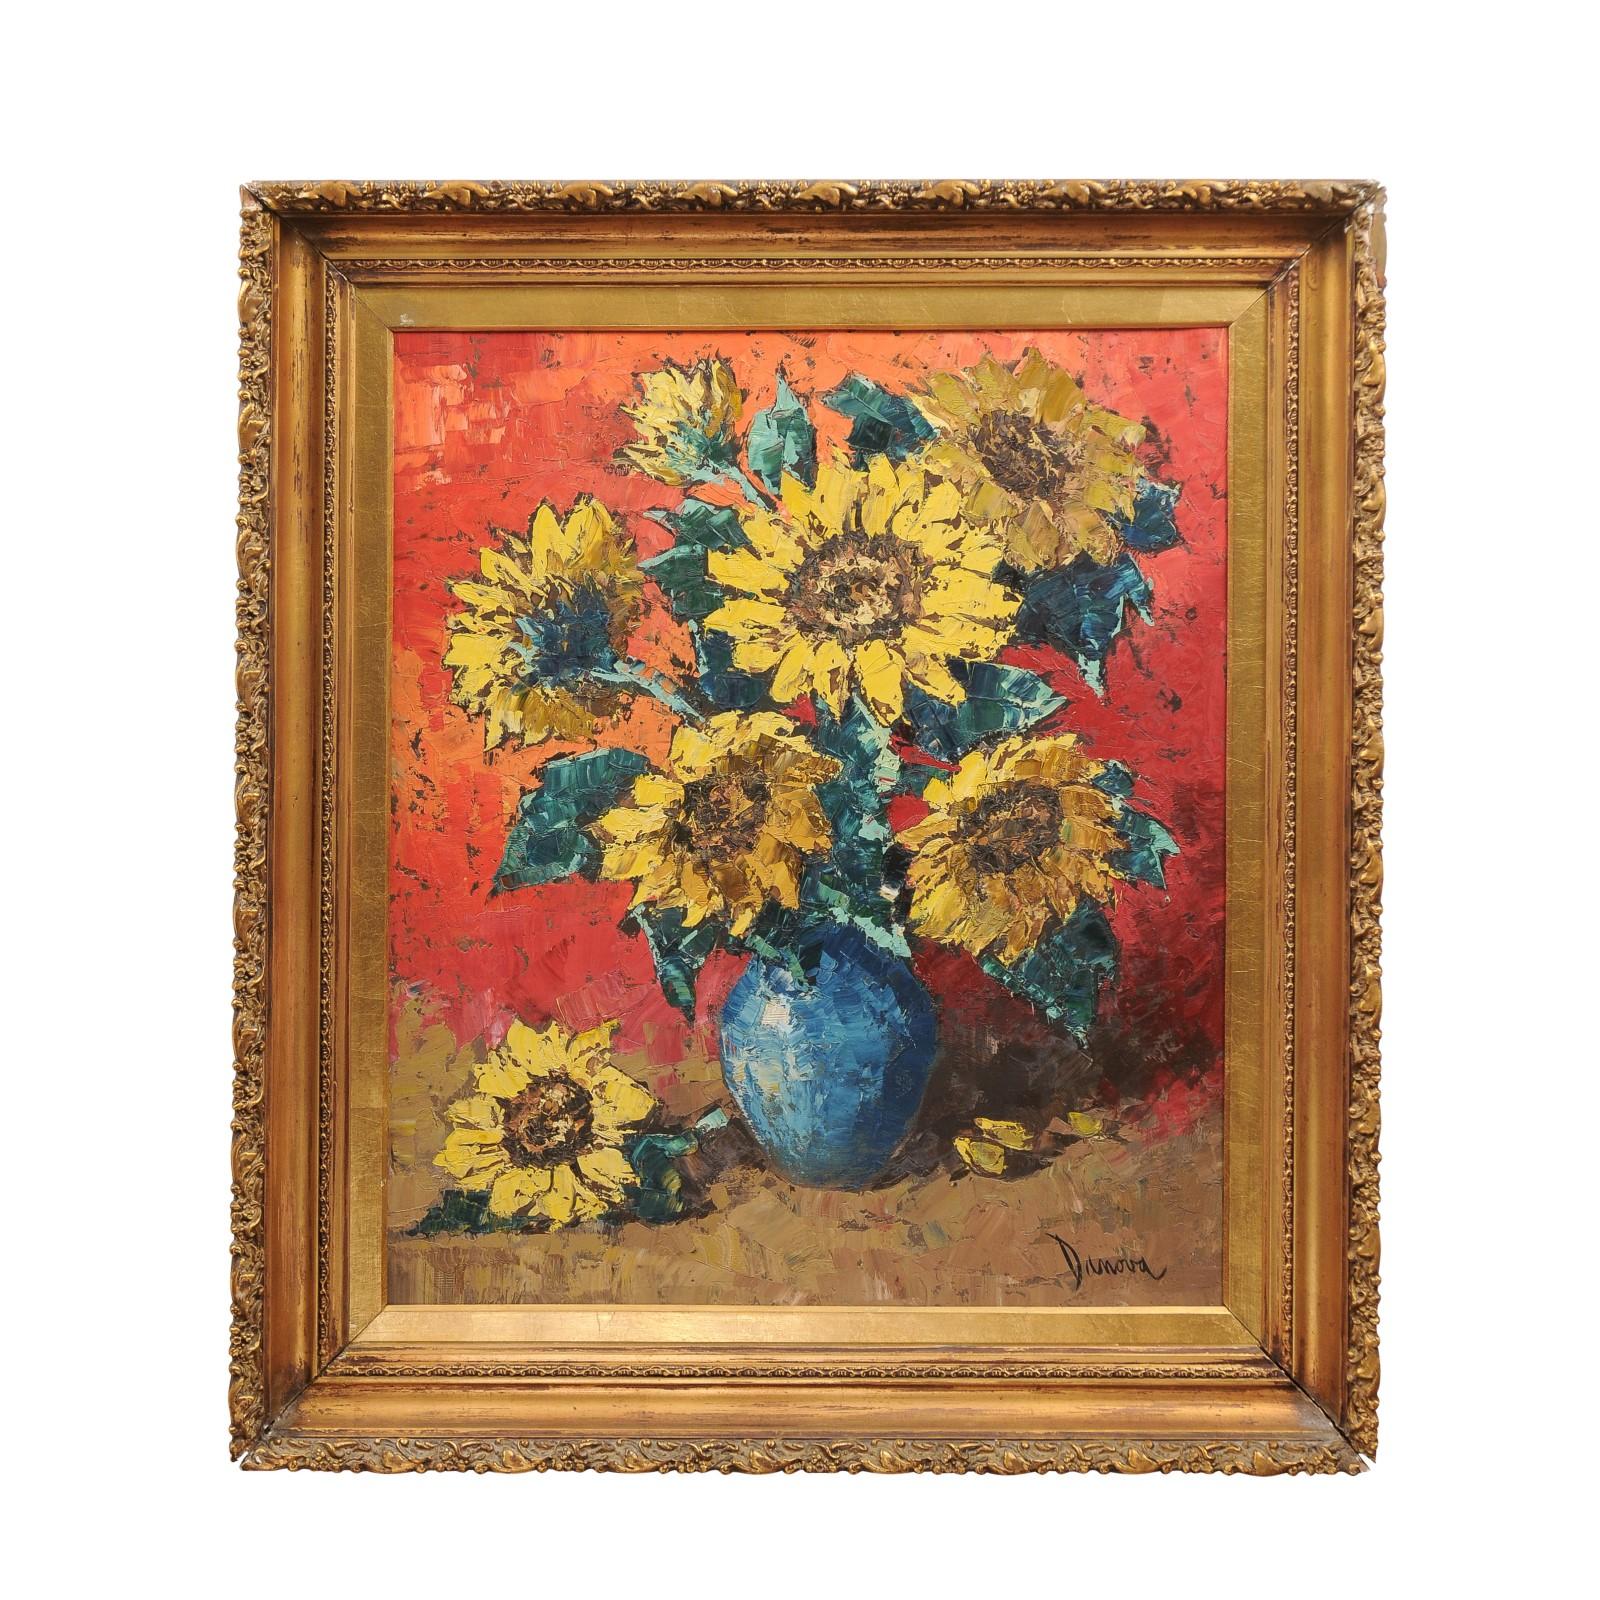  Giltwood Framed Oil on Board Painting of Sunflowers in Vase, Signed, 20th c. For Sale 11